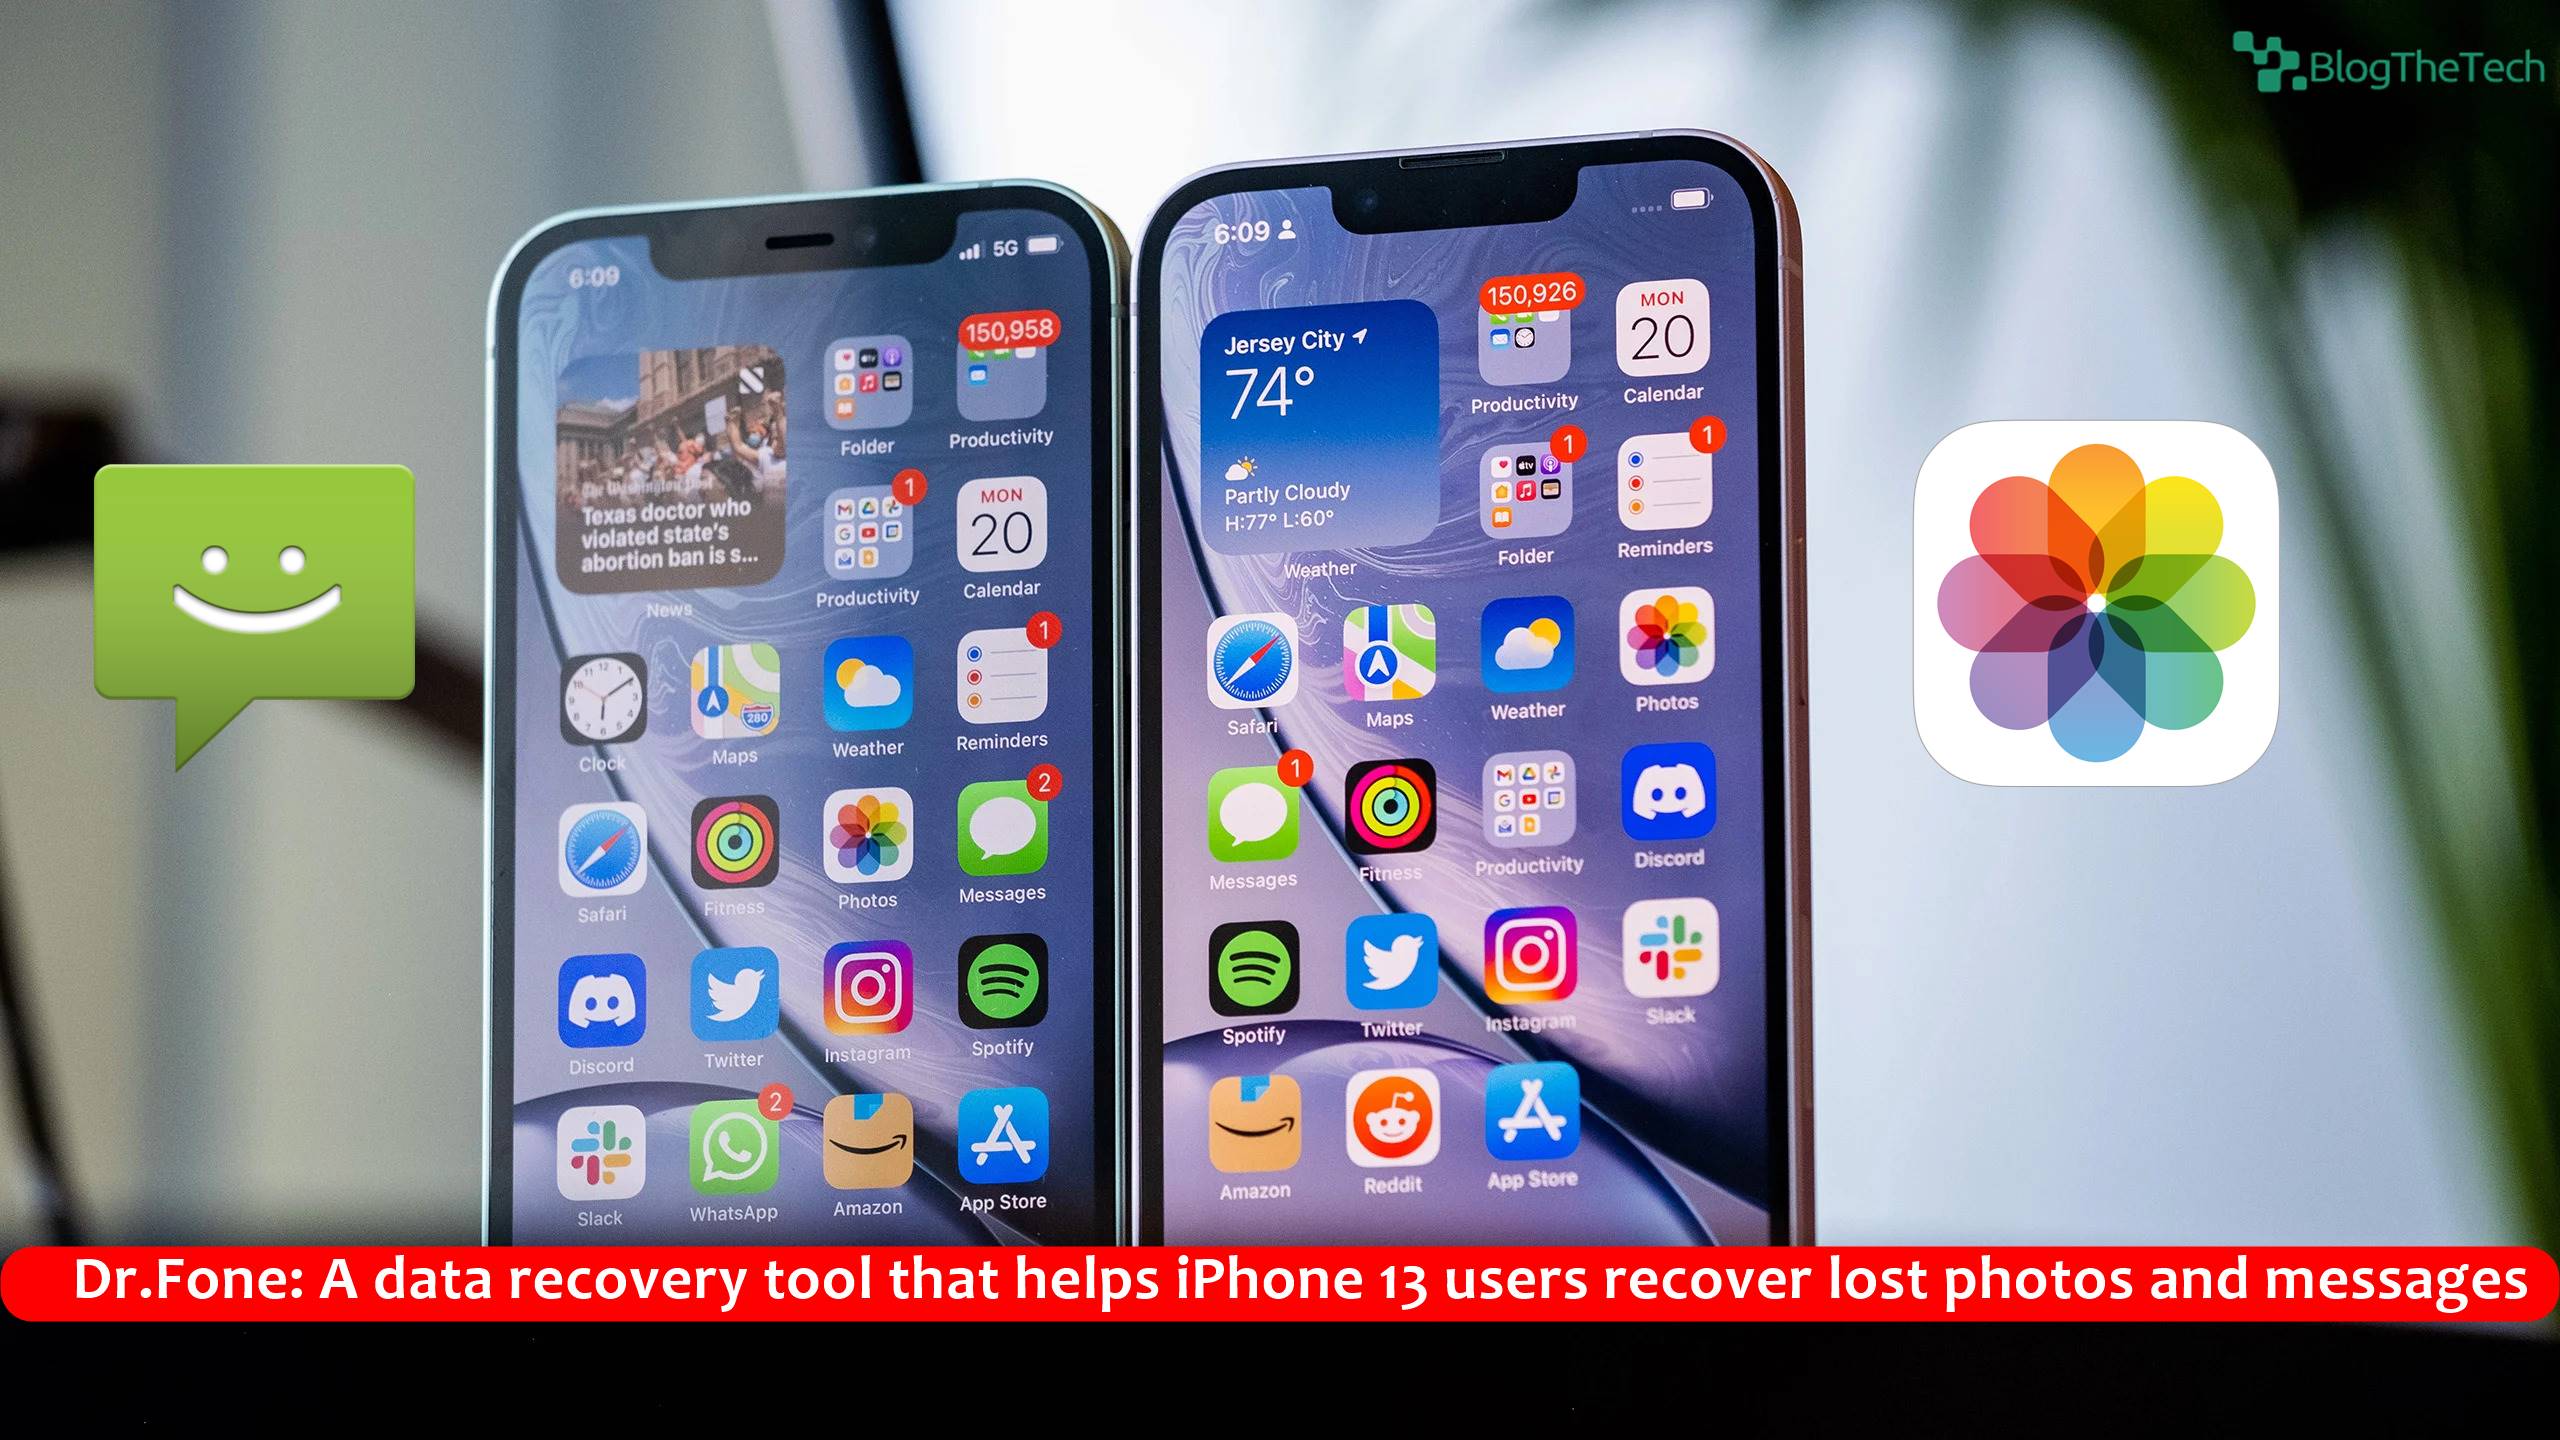 Dr.Fone: A data recovery tool that helps iPhone 13 users recover lost photos and messages.